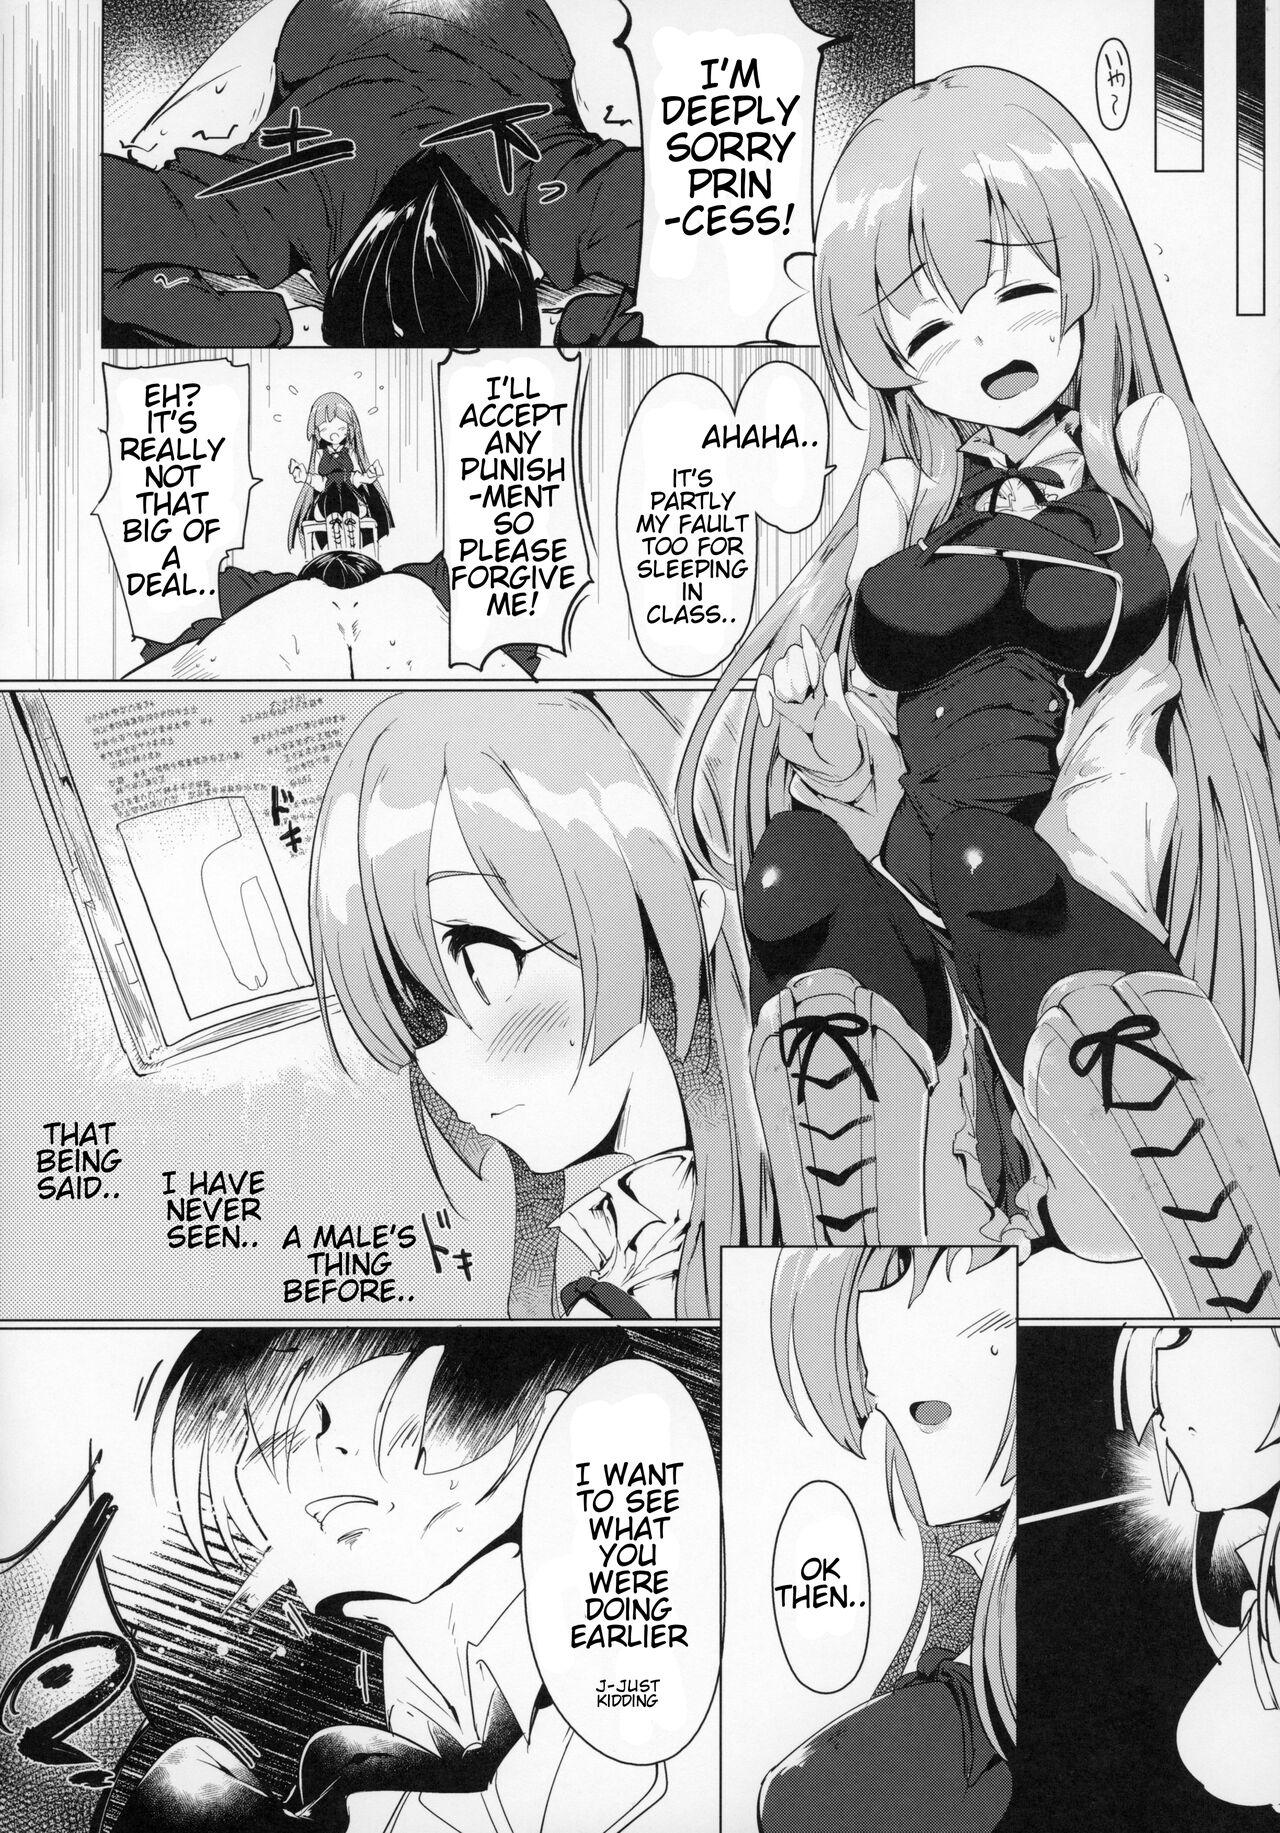 Women Sucking There's No Way An Ecchi Event Will Happen Between Me and the Princess of Manaria Kingdom! - Manaria friends Amature Porn - Page 9